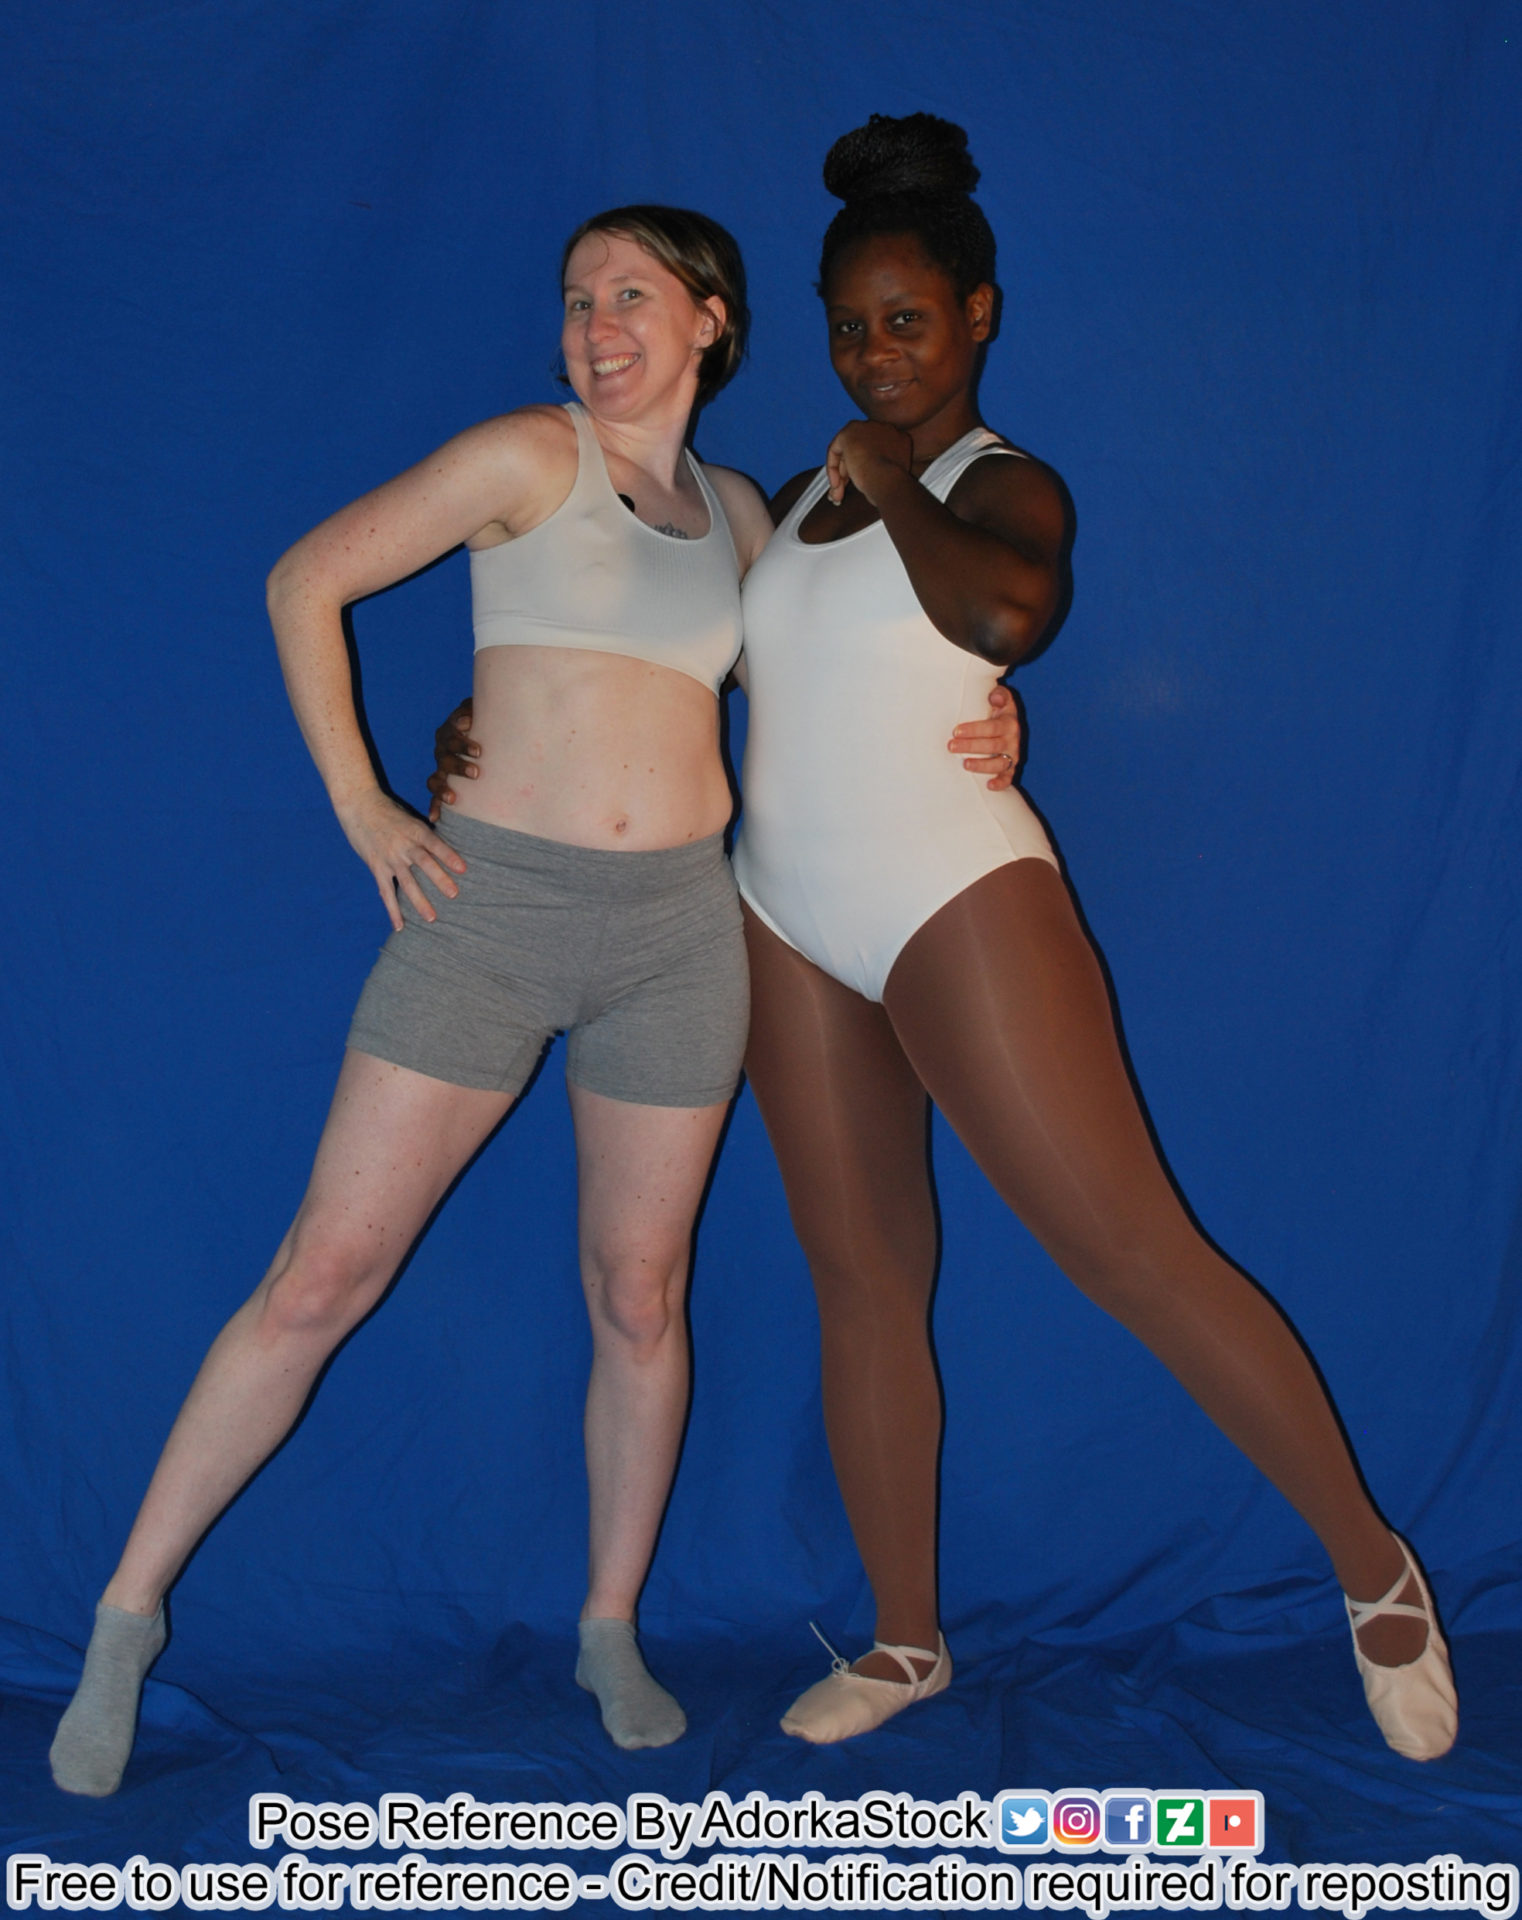 Two fit pose reference models, one white one black, standing together with arms around each other looking cute together